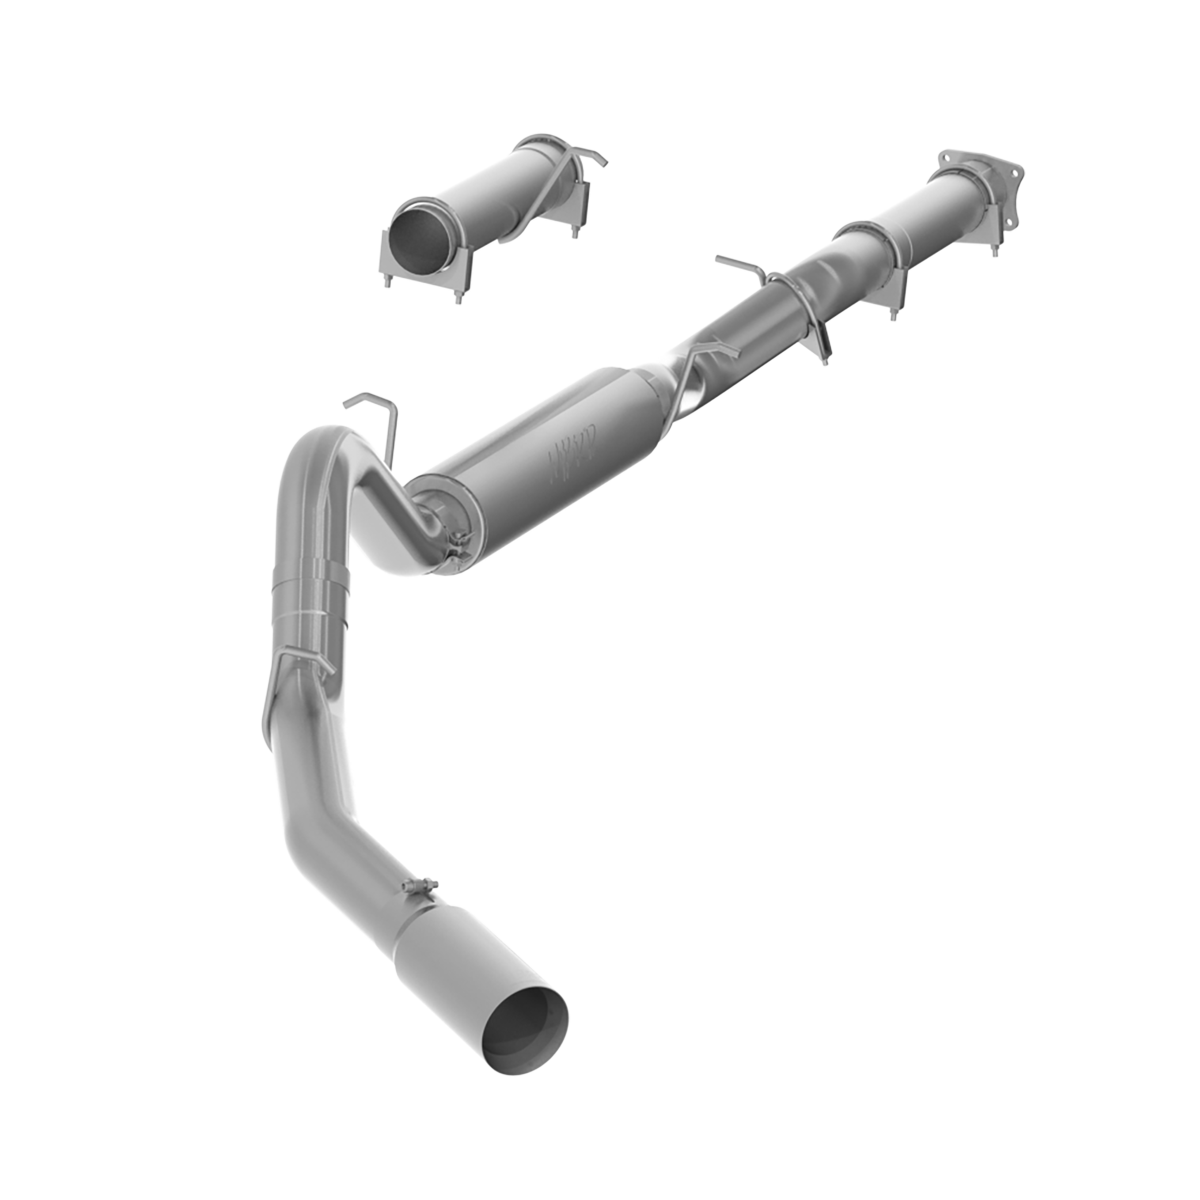 MBRP 4 Inch Cat Back Exhaust System For 01-05 Silverado-Sierra 2500